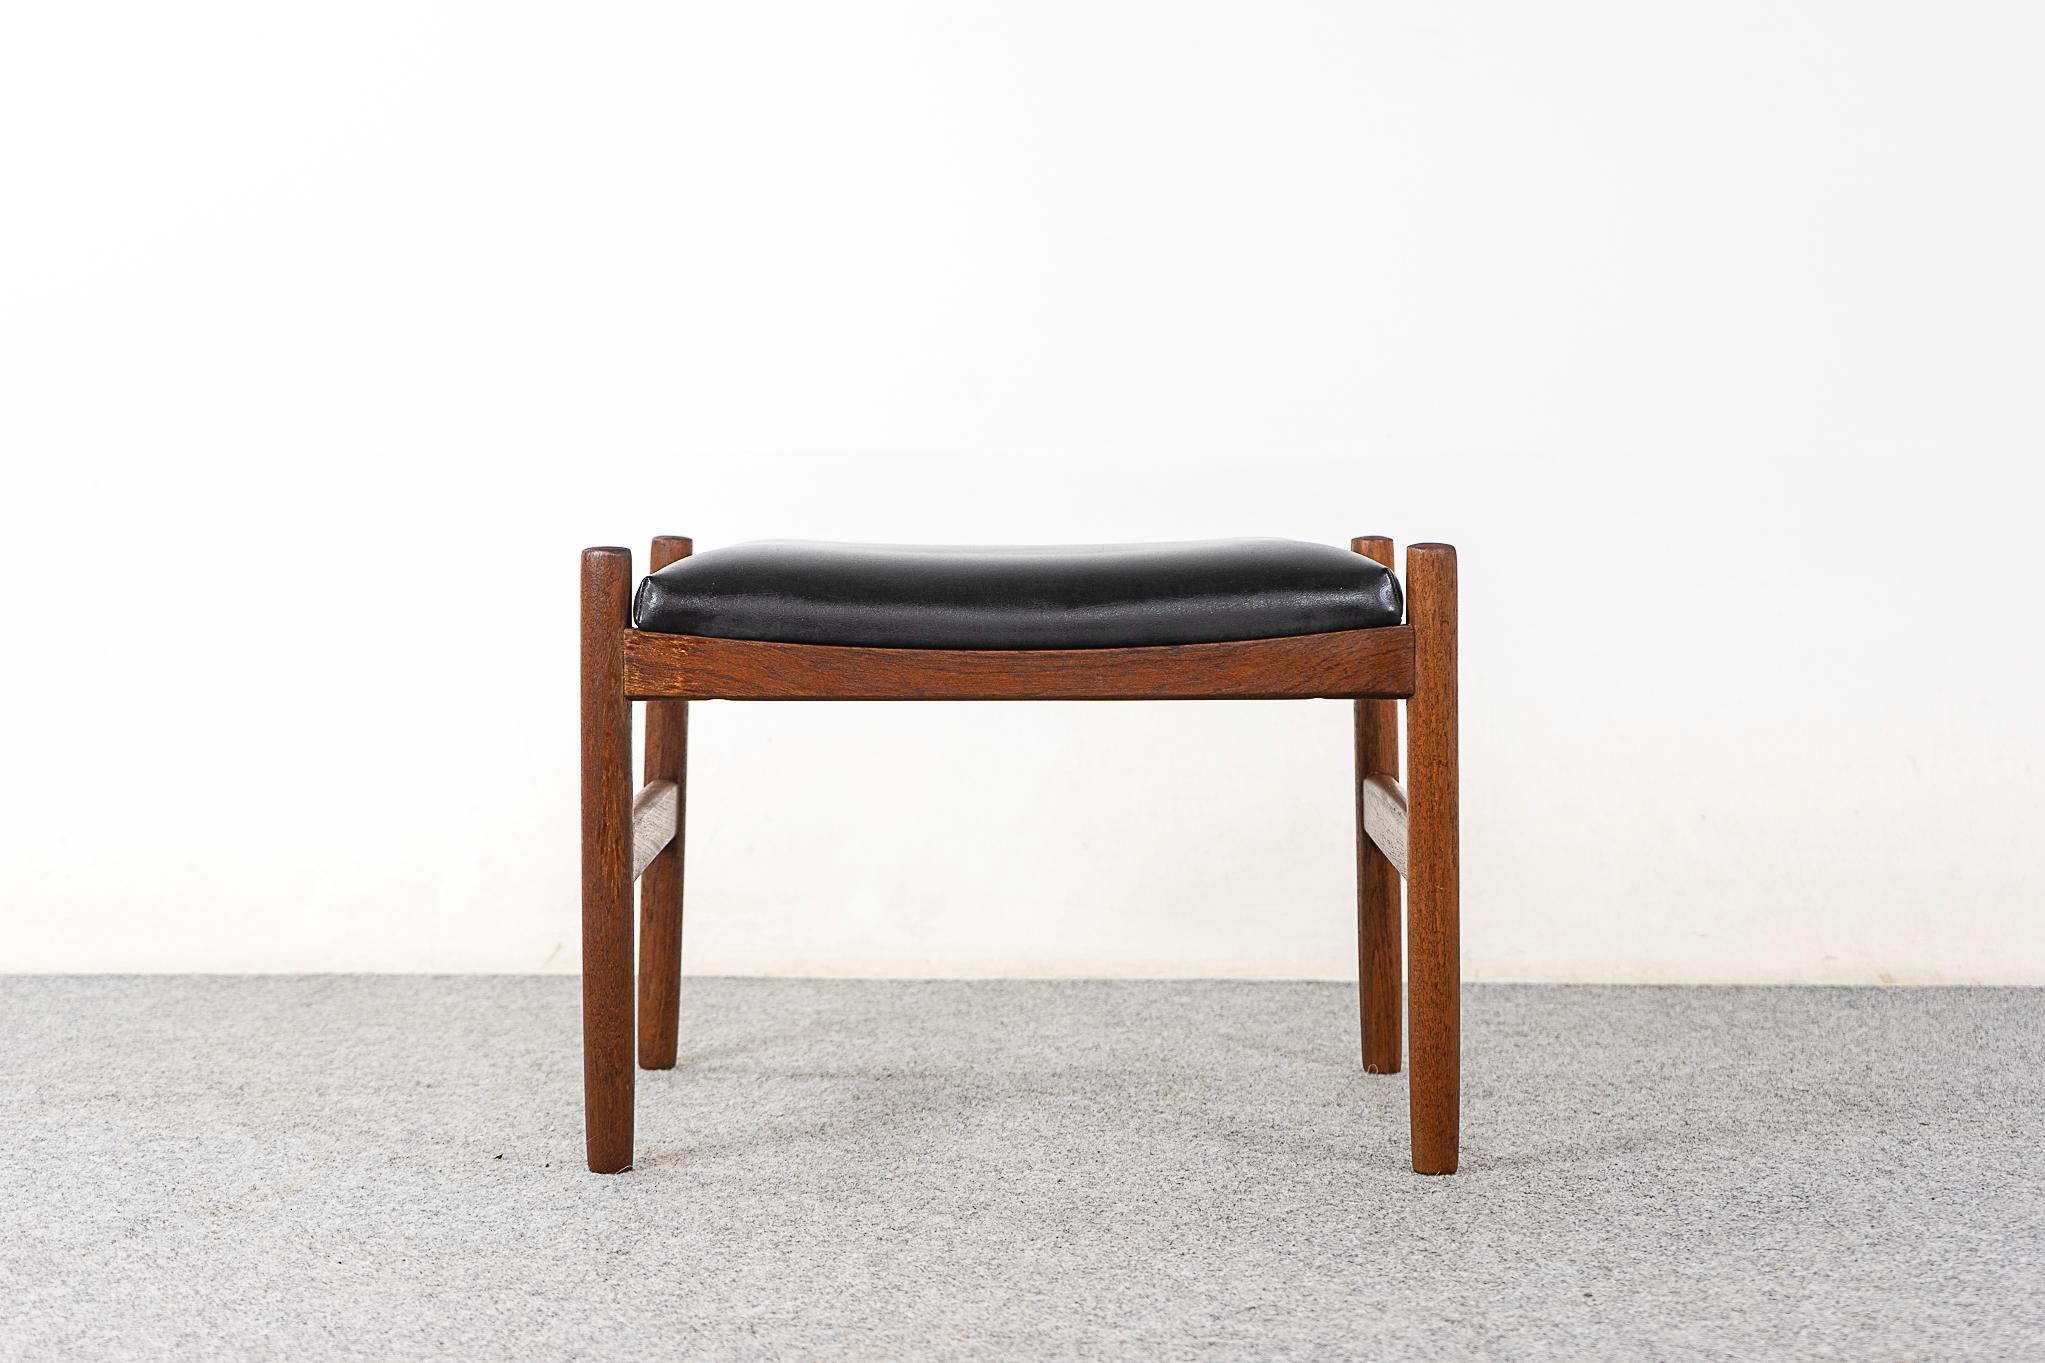 Teak Danish footstool by Spottrup, circa 1960's. Robust construction with cross supports and original upholstery. Spottrup & Danish Furniture Makers' control stamp intact.